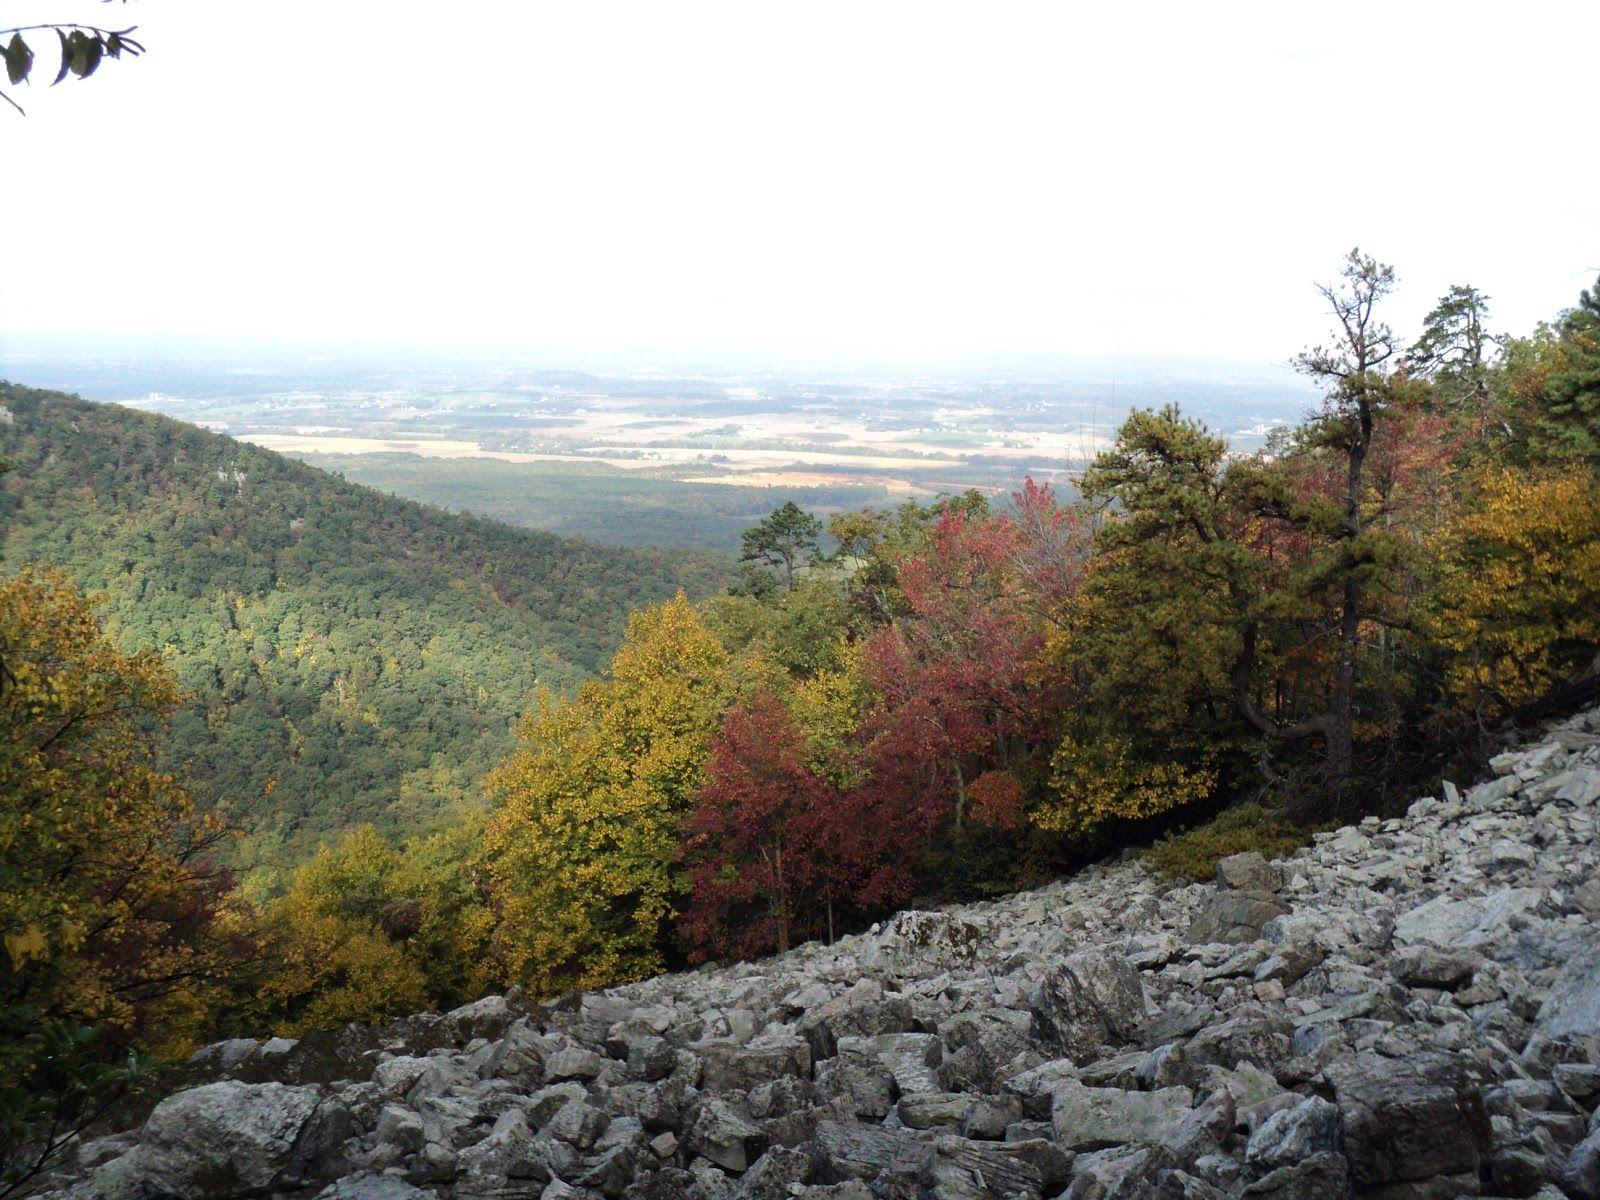 Blissful Hiking Explore Some Wilderness in Shenandoah National Park!